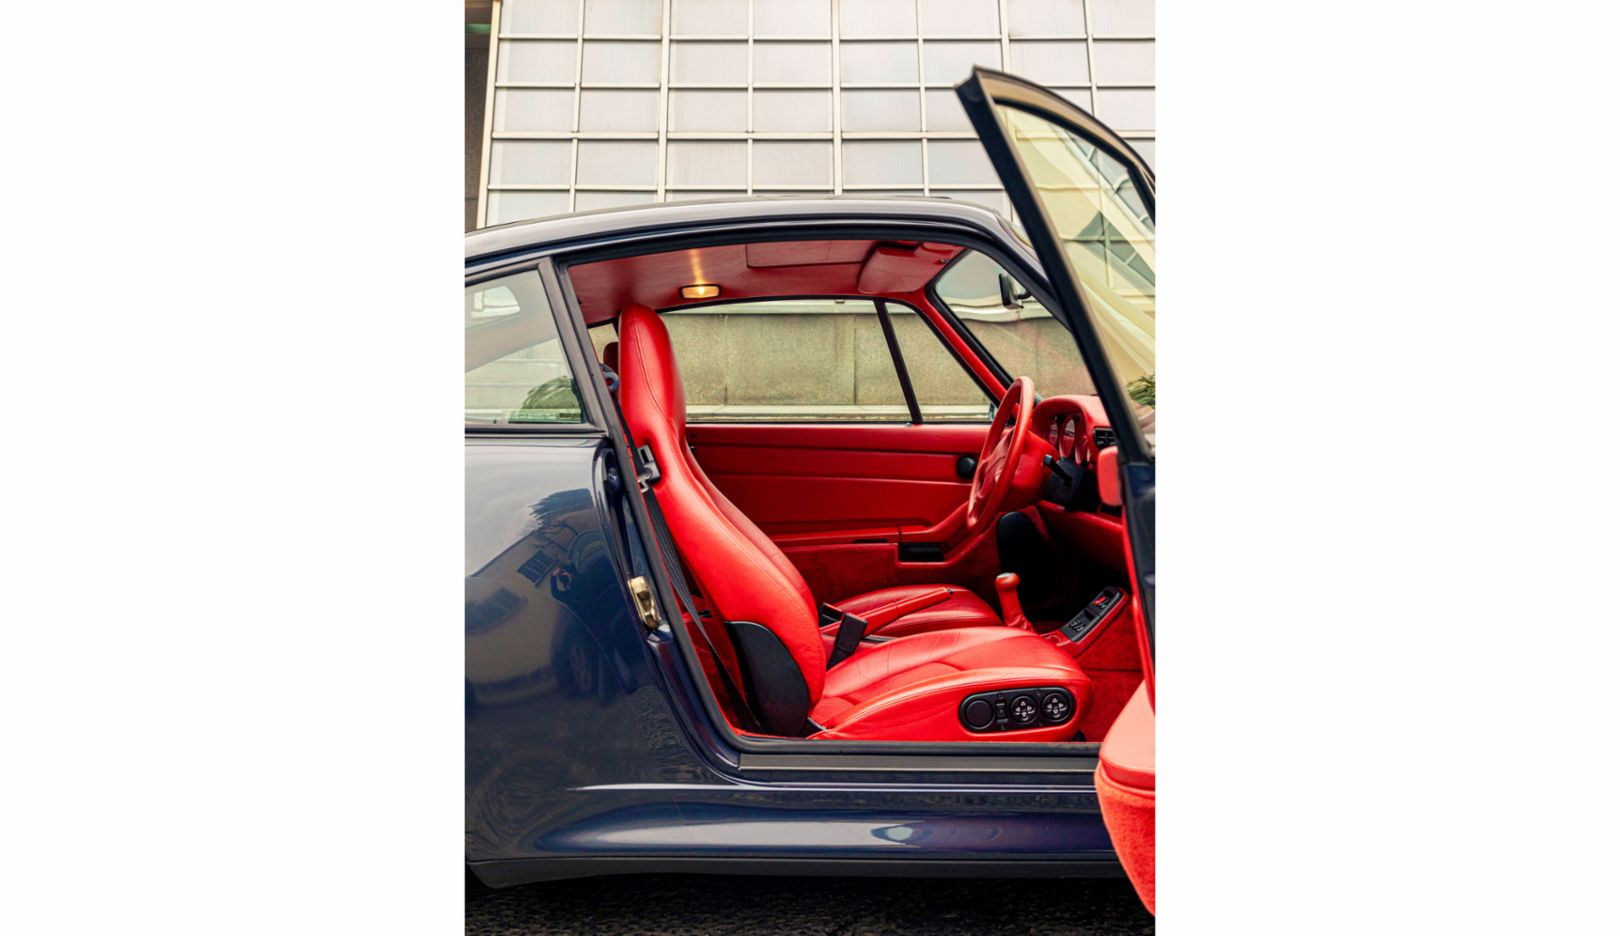 The entire interior of Miani’s 911 is in Can Can Red, like the skirts of the dancers at the Moulin Rouge in Paris.